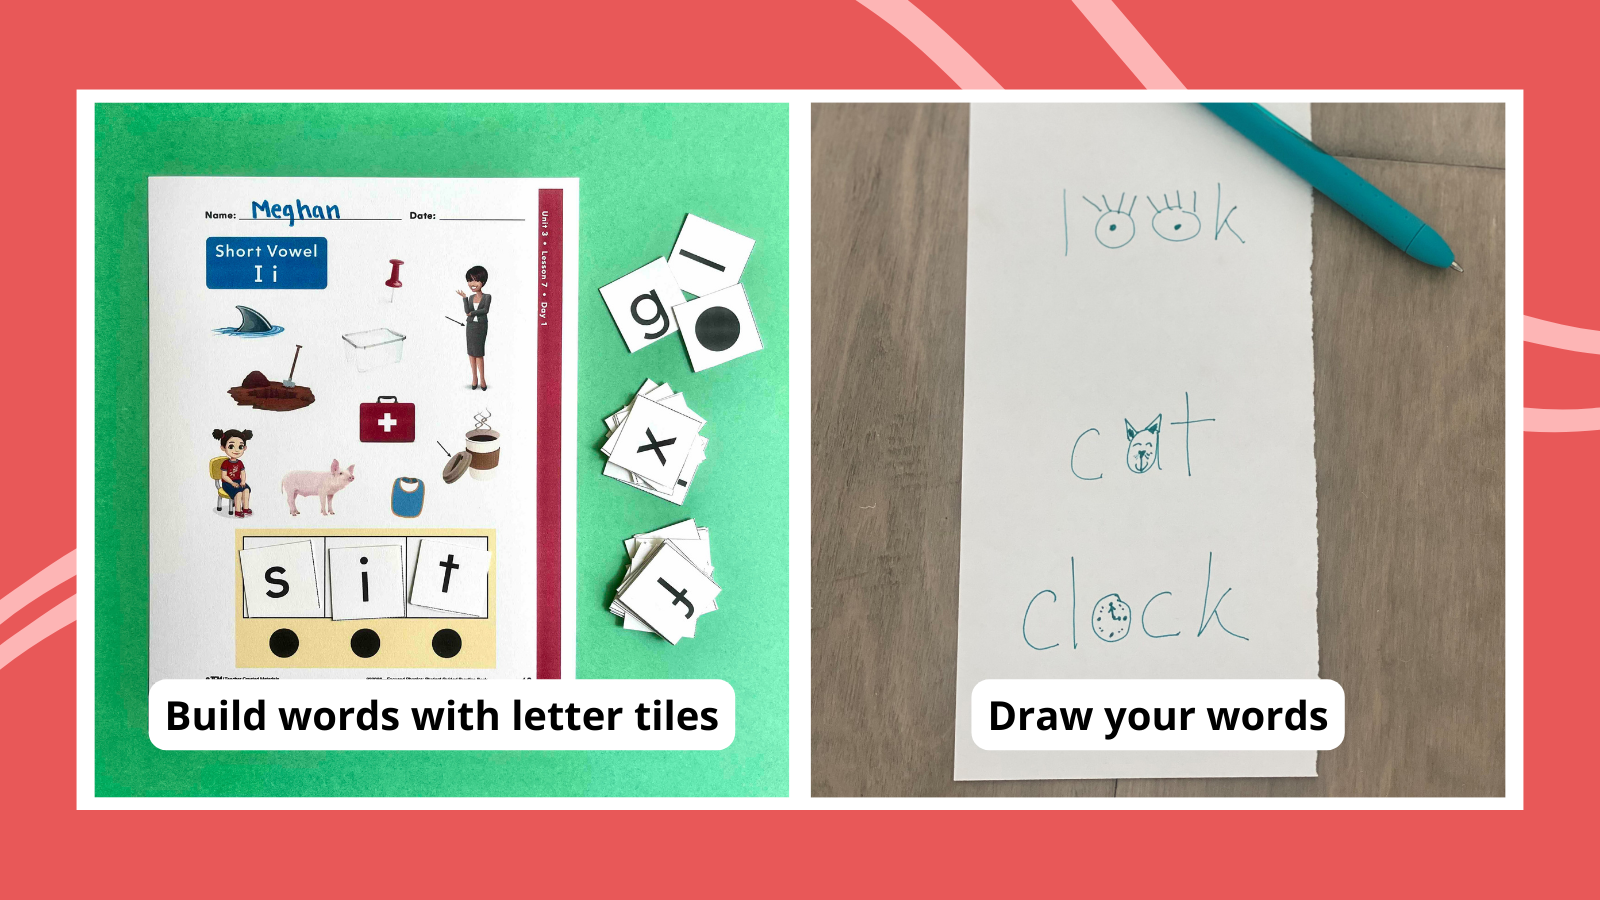 Decoding strategies including drawing words and using concept cards and letter tiles